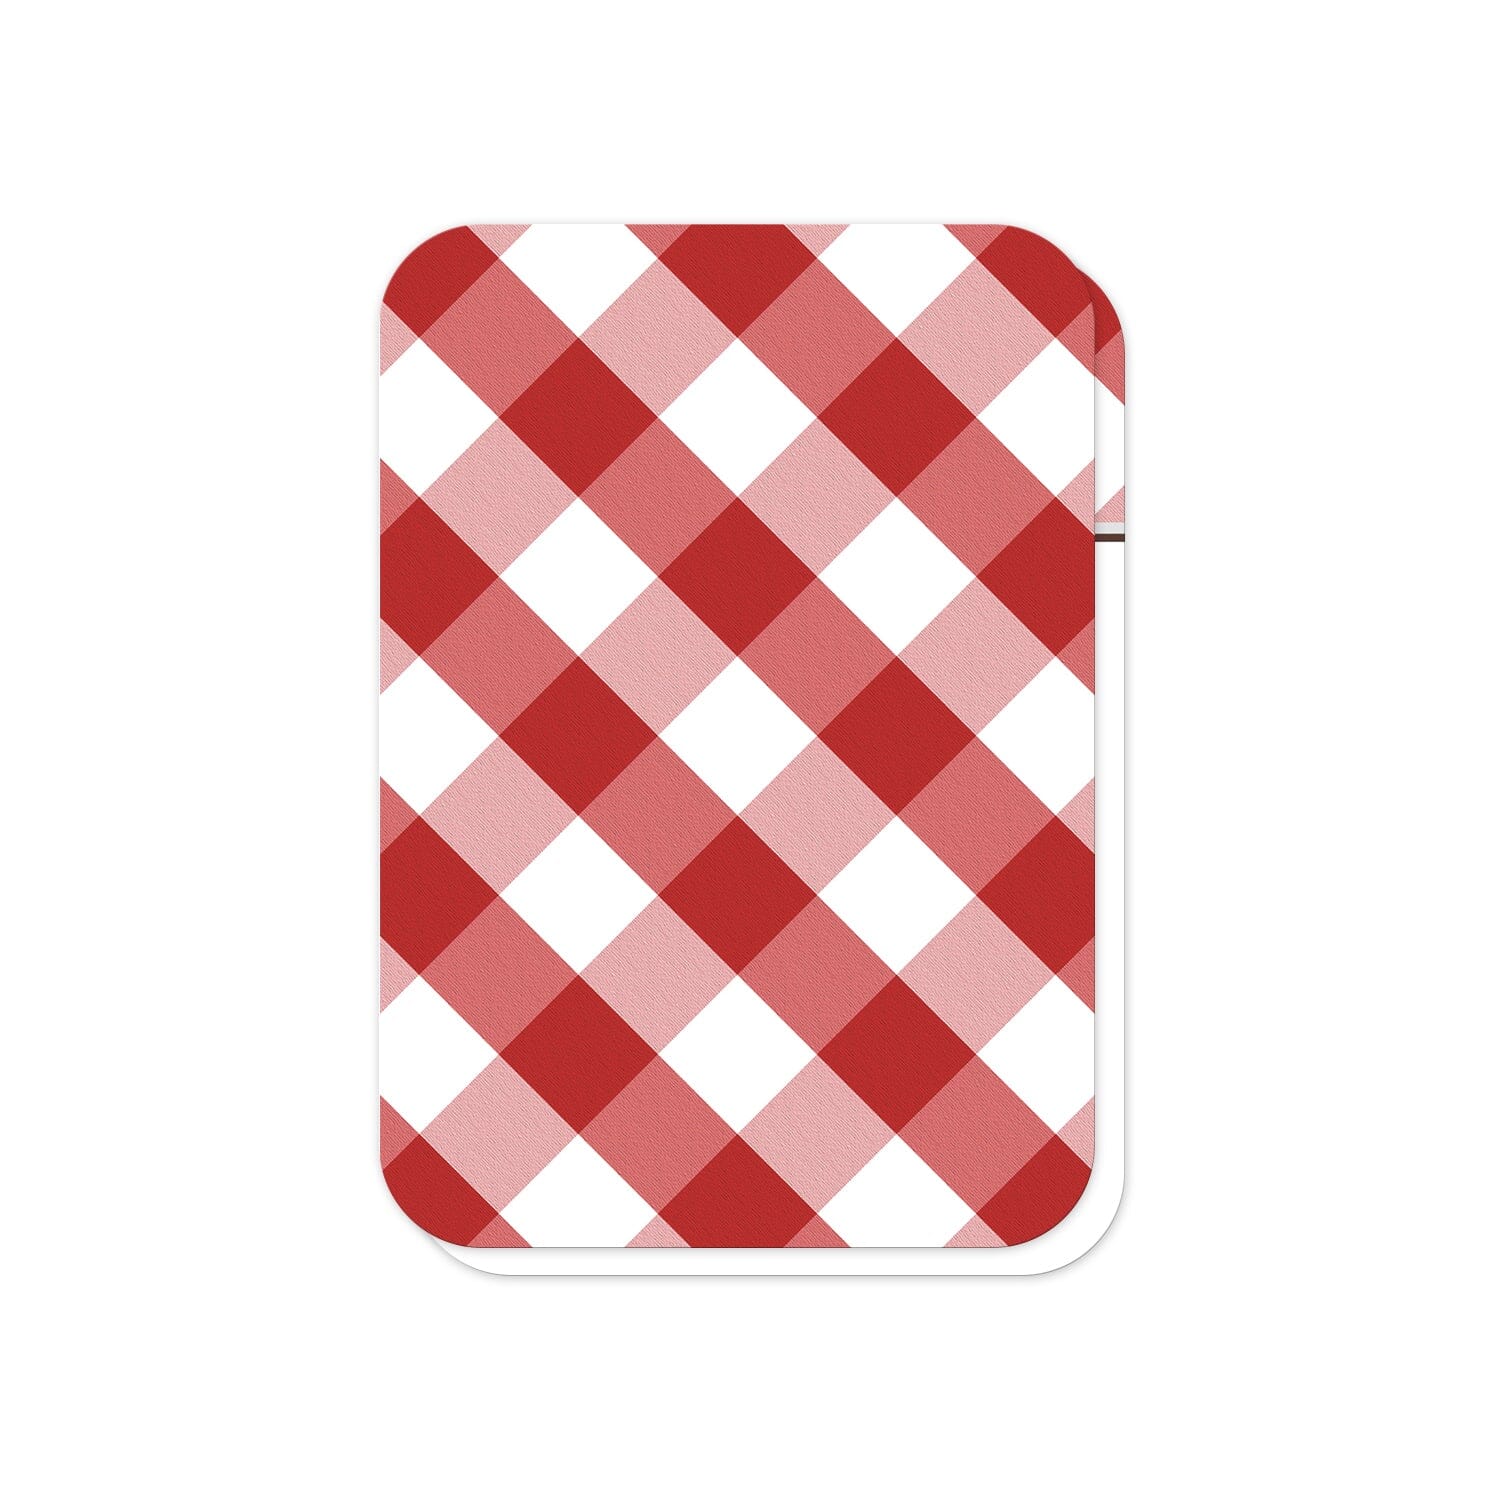 Red Gingham I Do BBQ RSVP Cards (back side with rounded corners) at Artistically Invited.